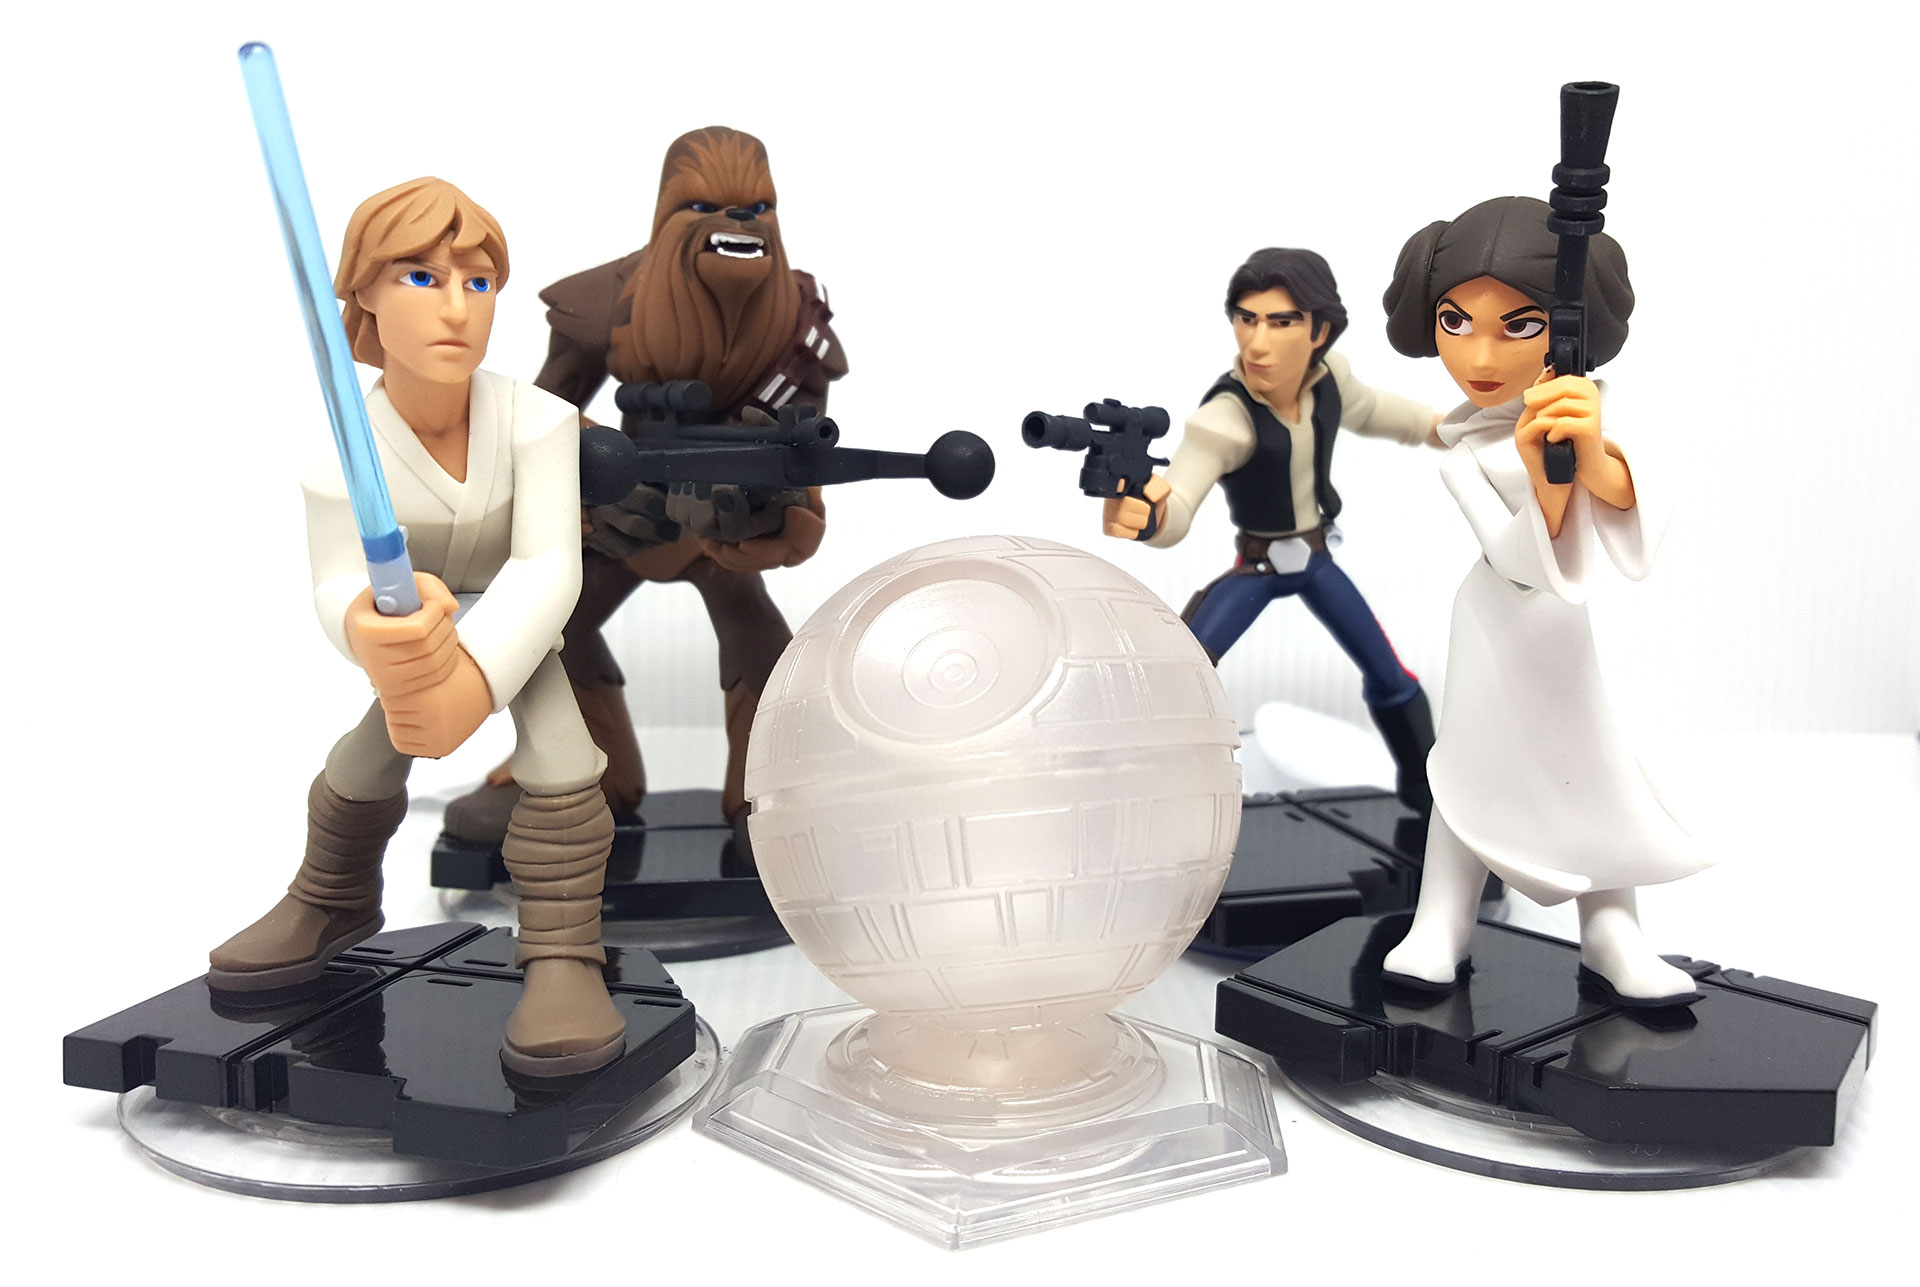 Disney Infinity’s Version Of The Original Star Wars Trilogy Is Way Different